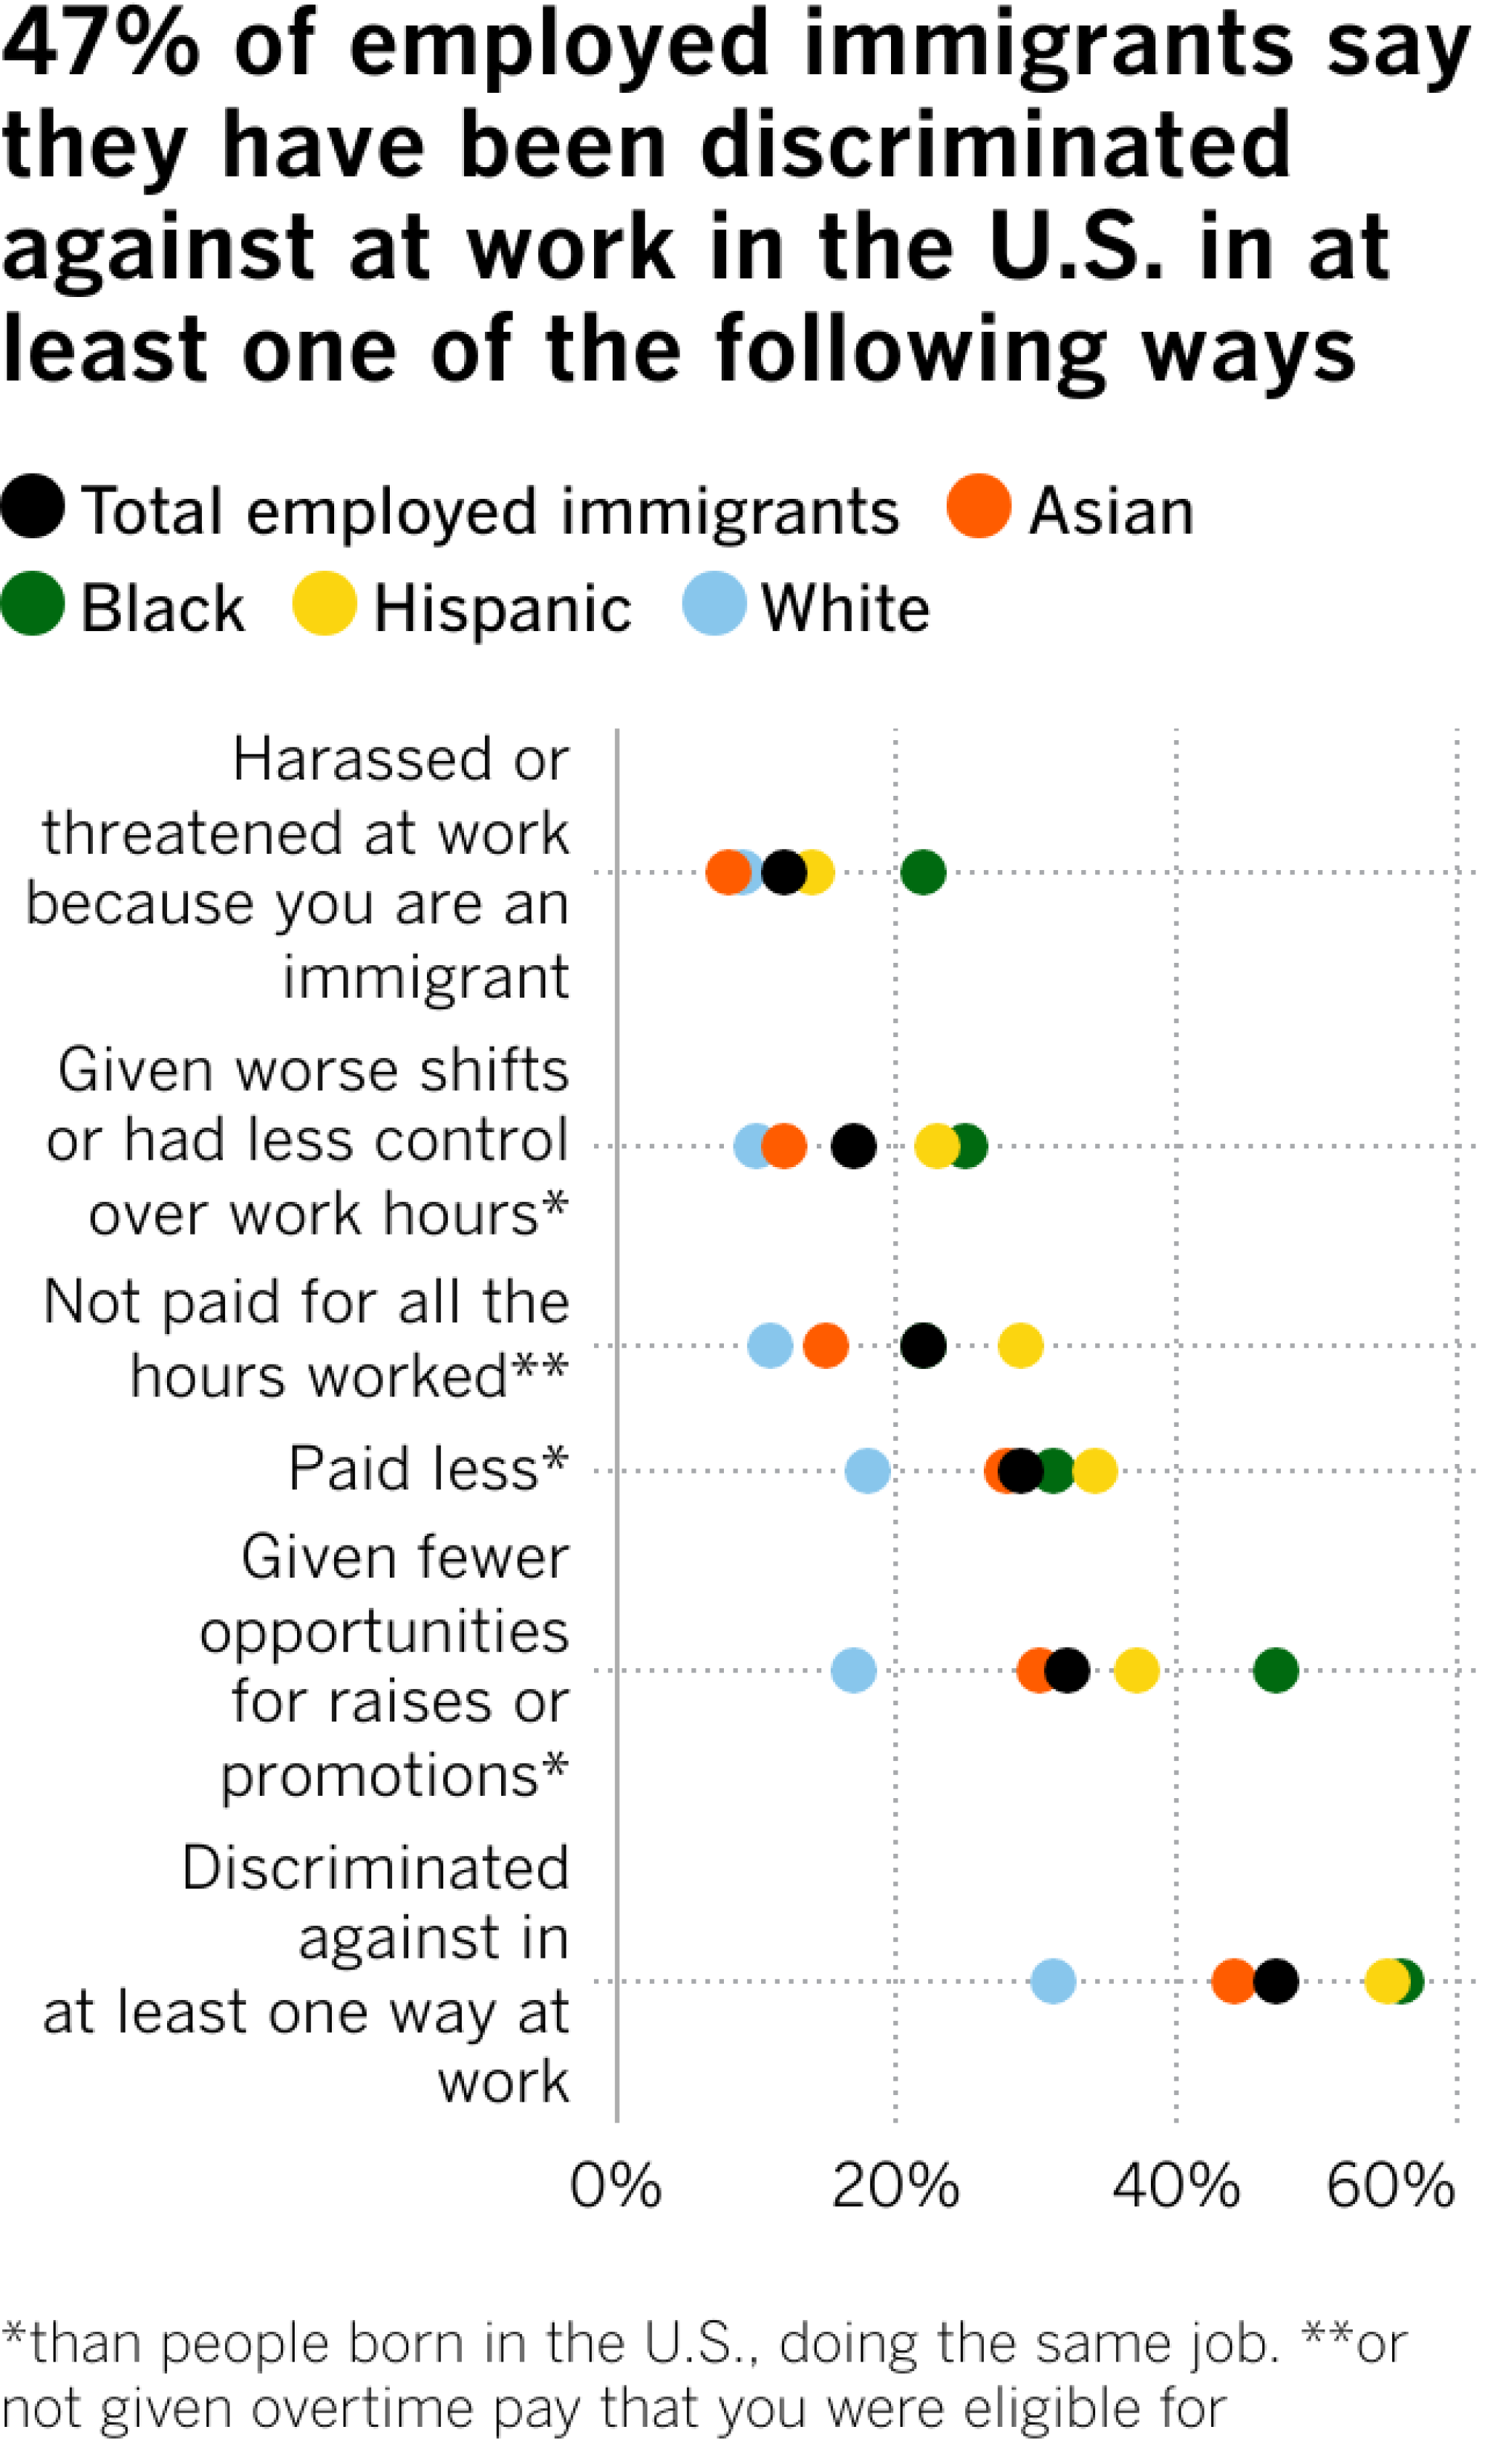 47% of employed immigrants say they have been discriminated against at work in the U.S. in at least one of the following ways